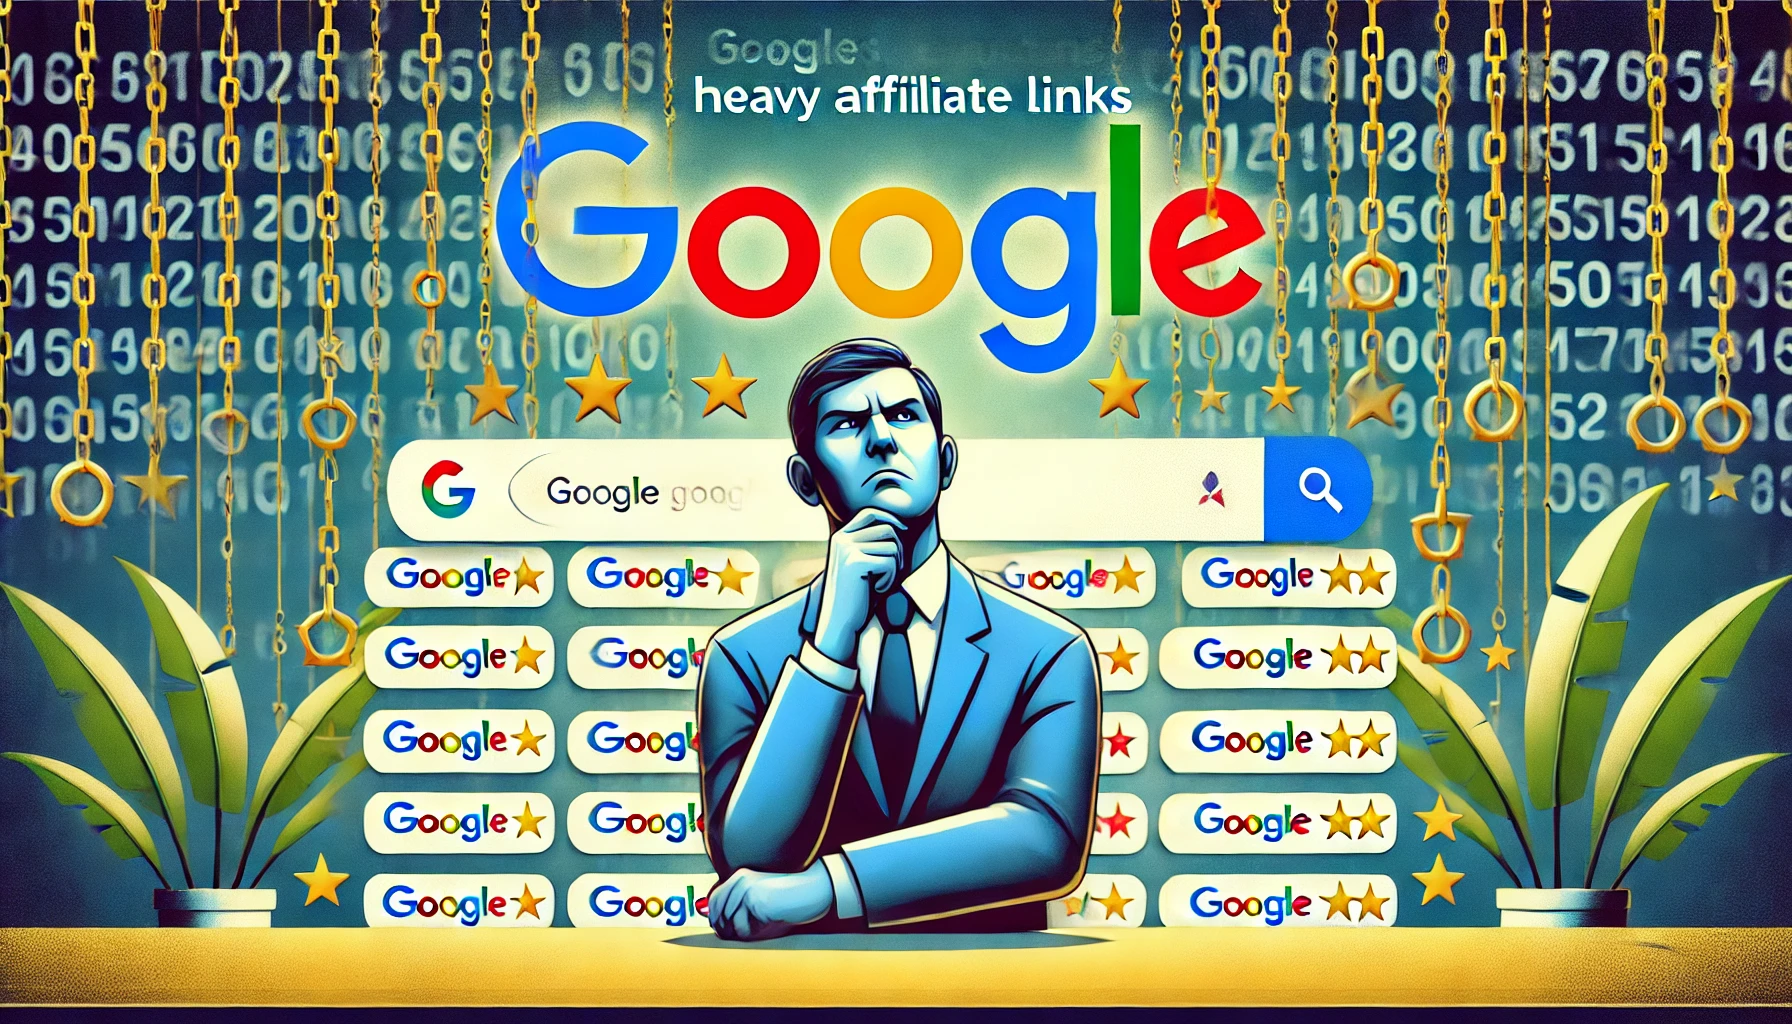 Heavy affiliate links with Google blog